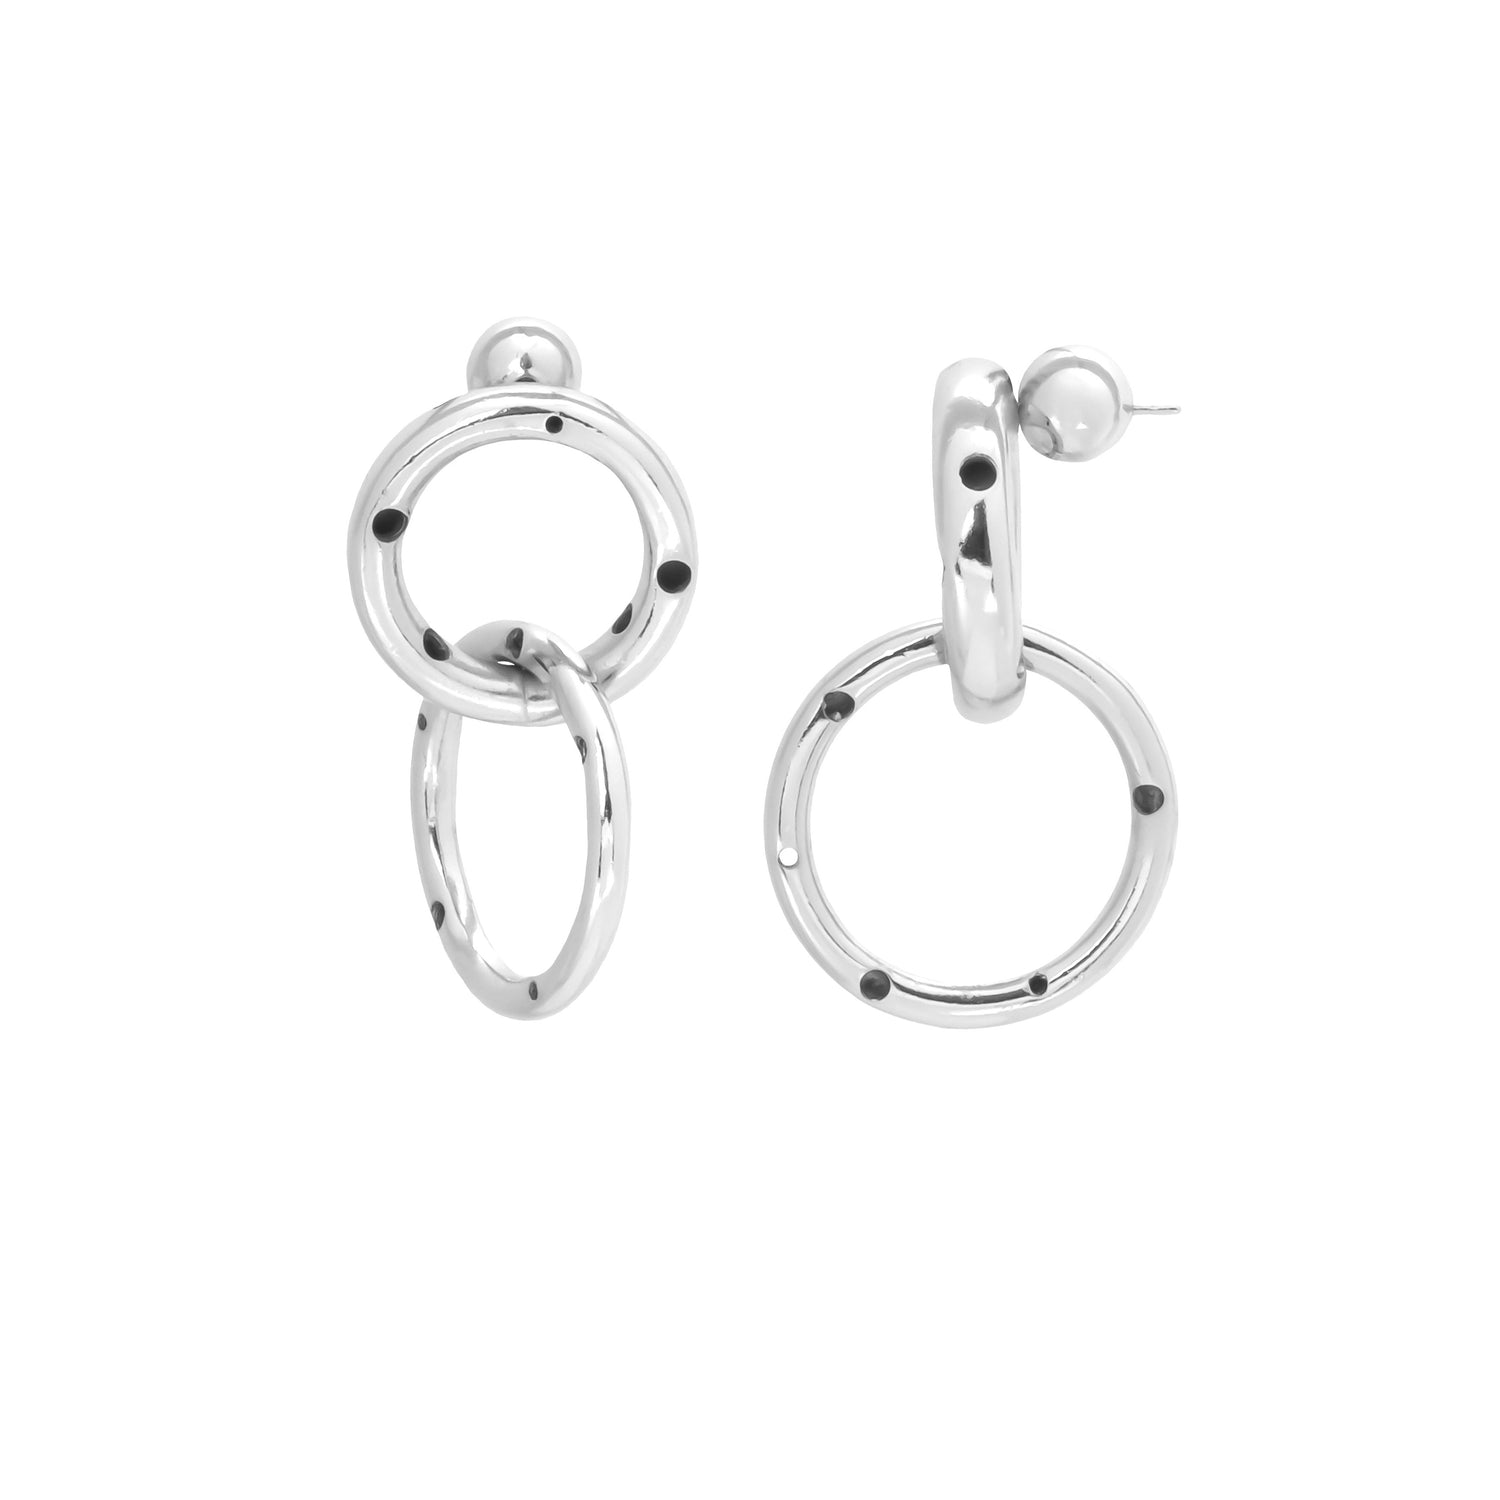 TWO RING EARRINGS SMALL SILVER